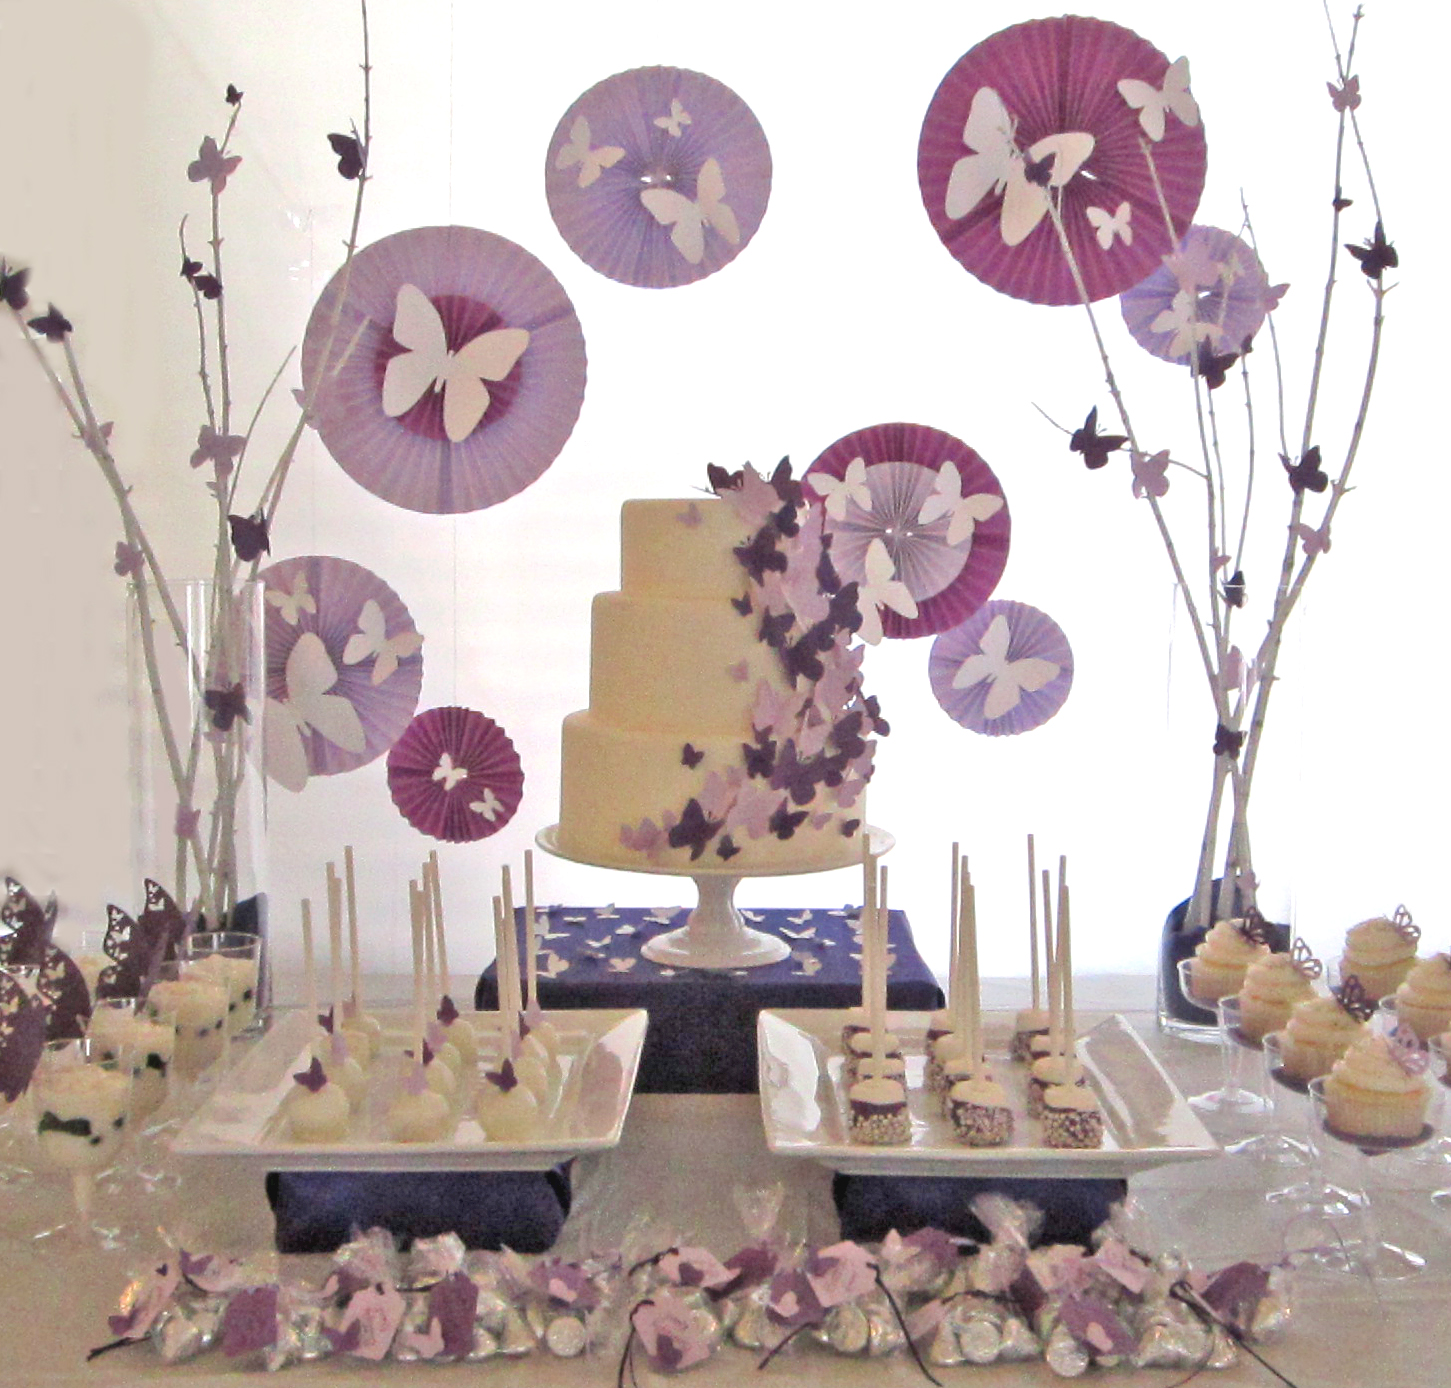 Sweeten Your Day Events: Butterfly Dessert Table